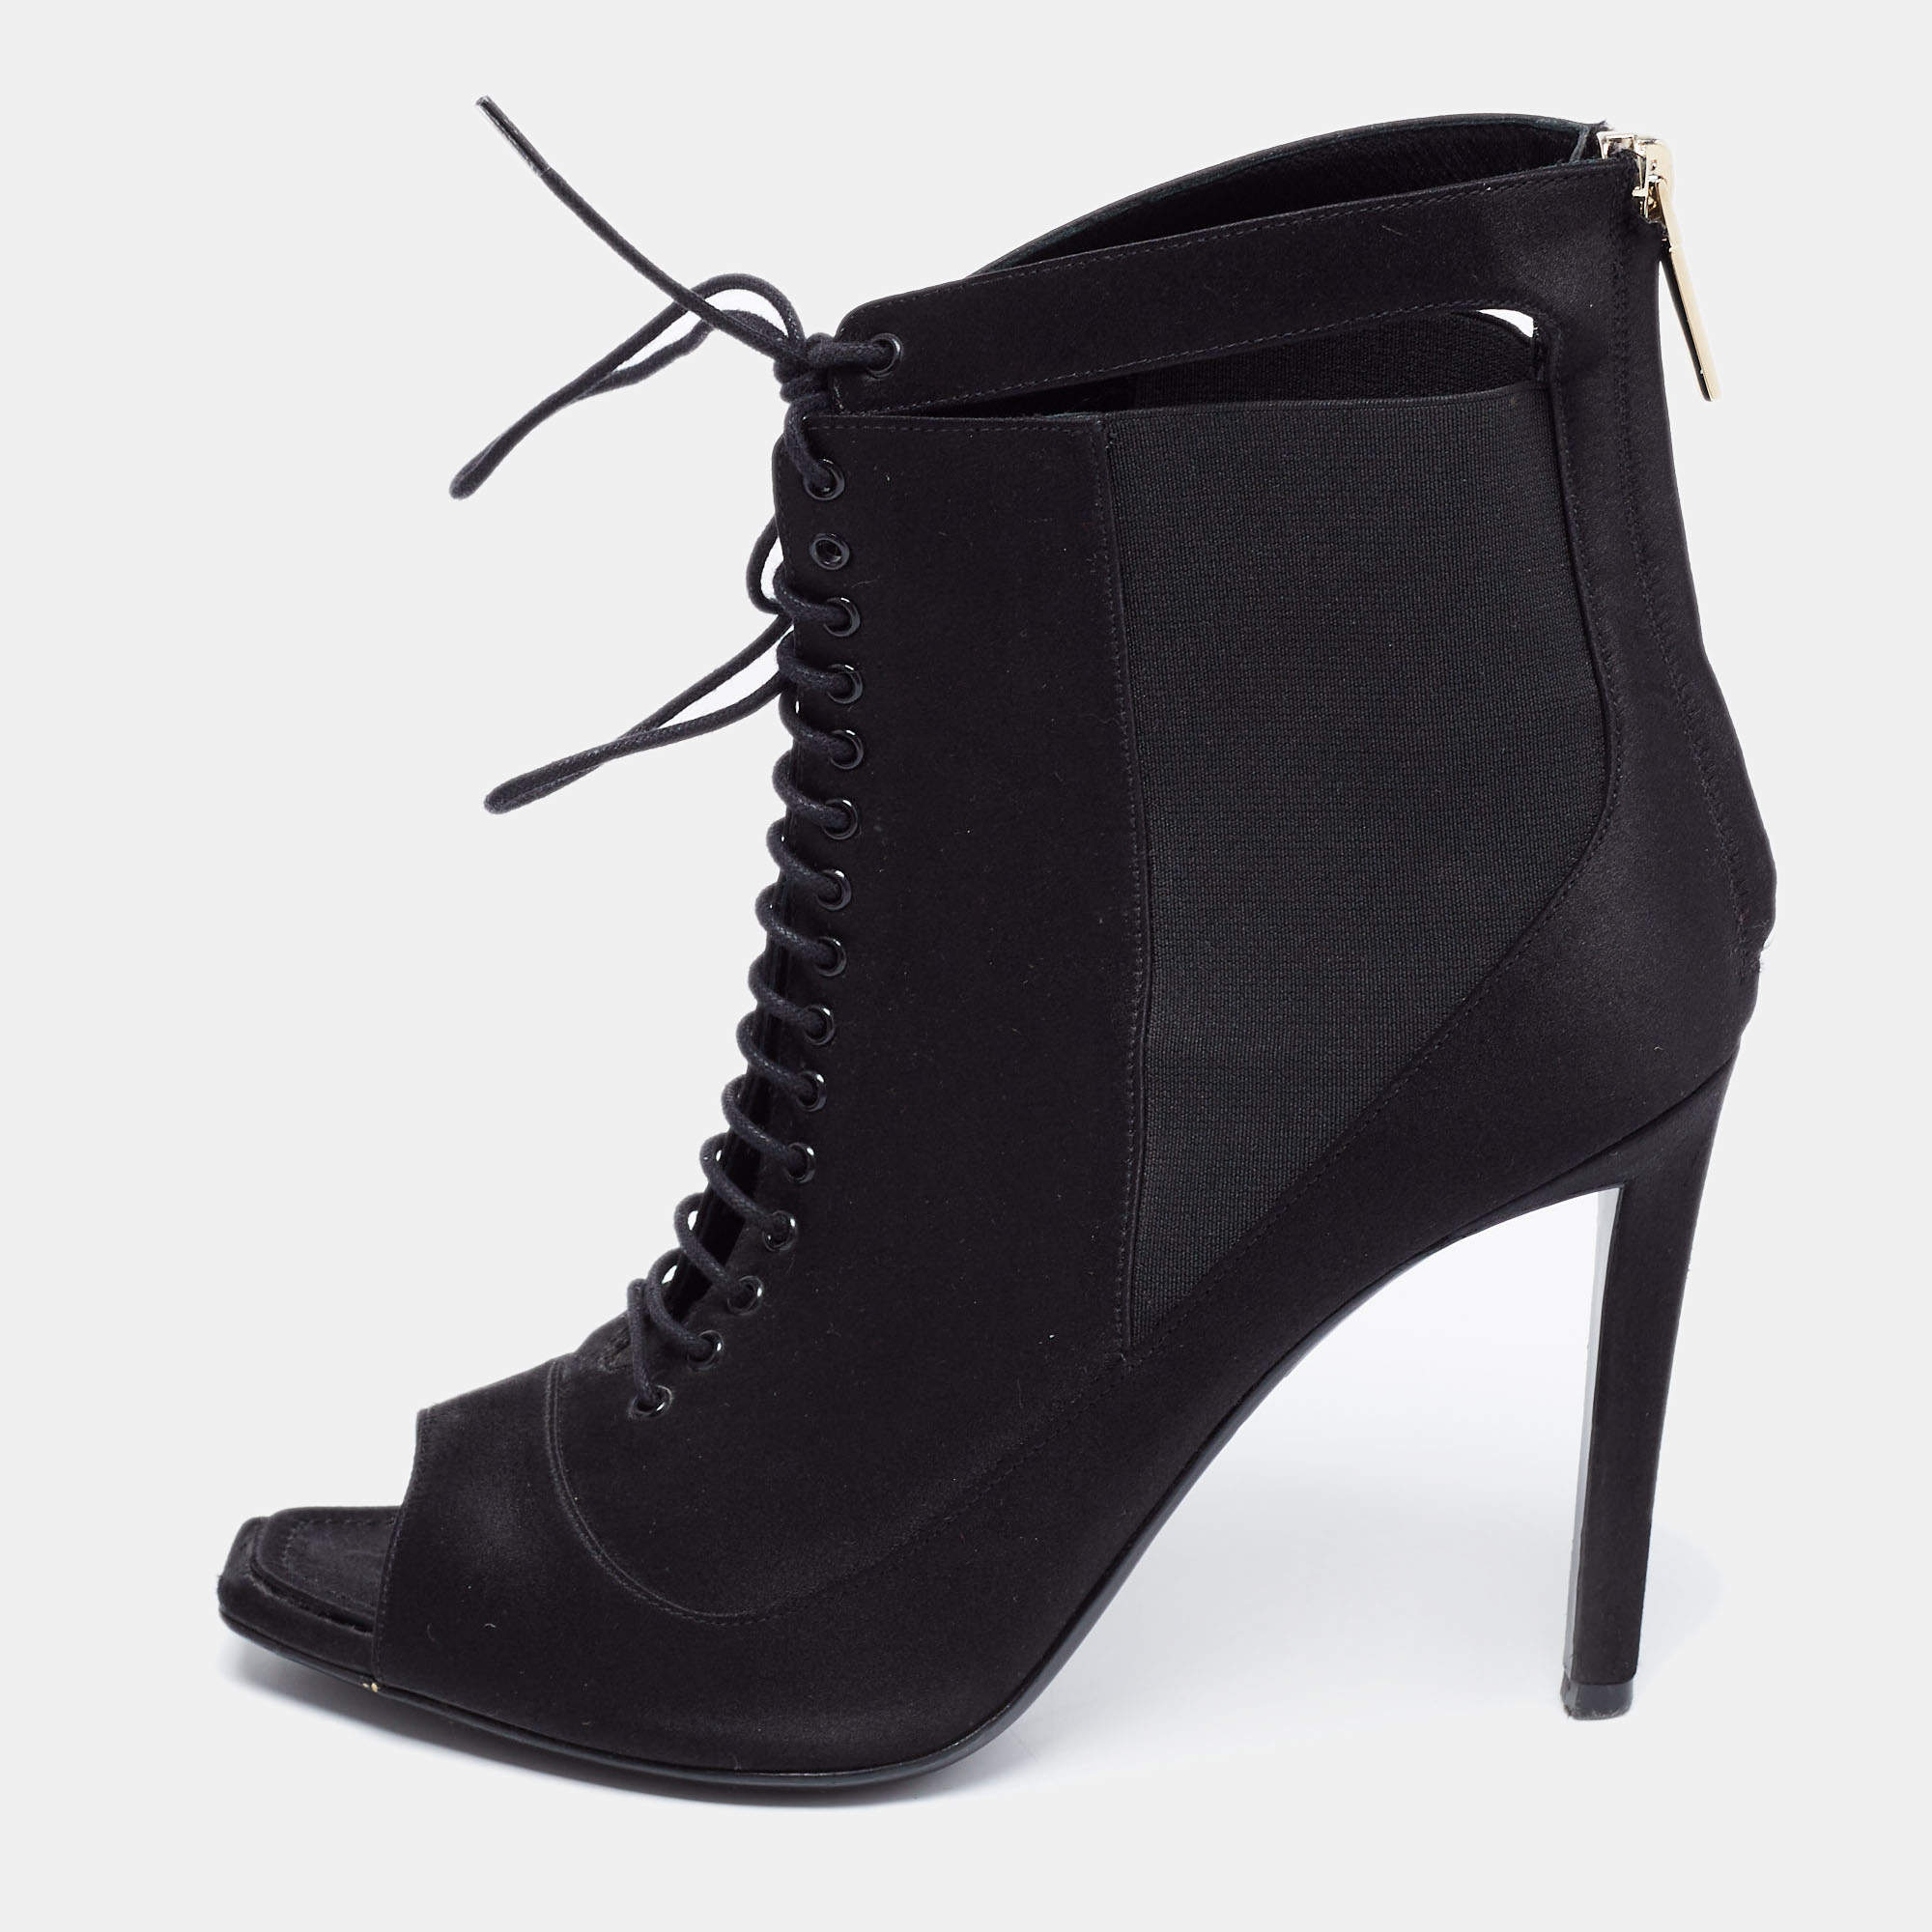 Dior Black Satin Peep-Toe Lace-Up Ankle Booties Size 38